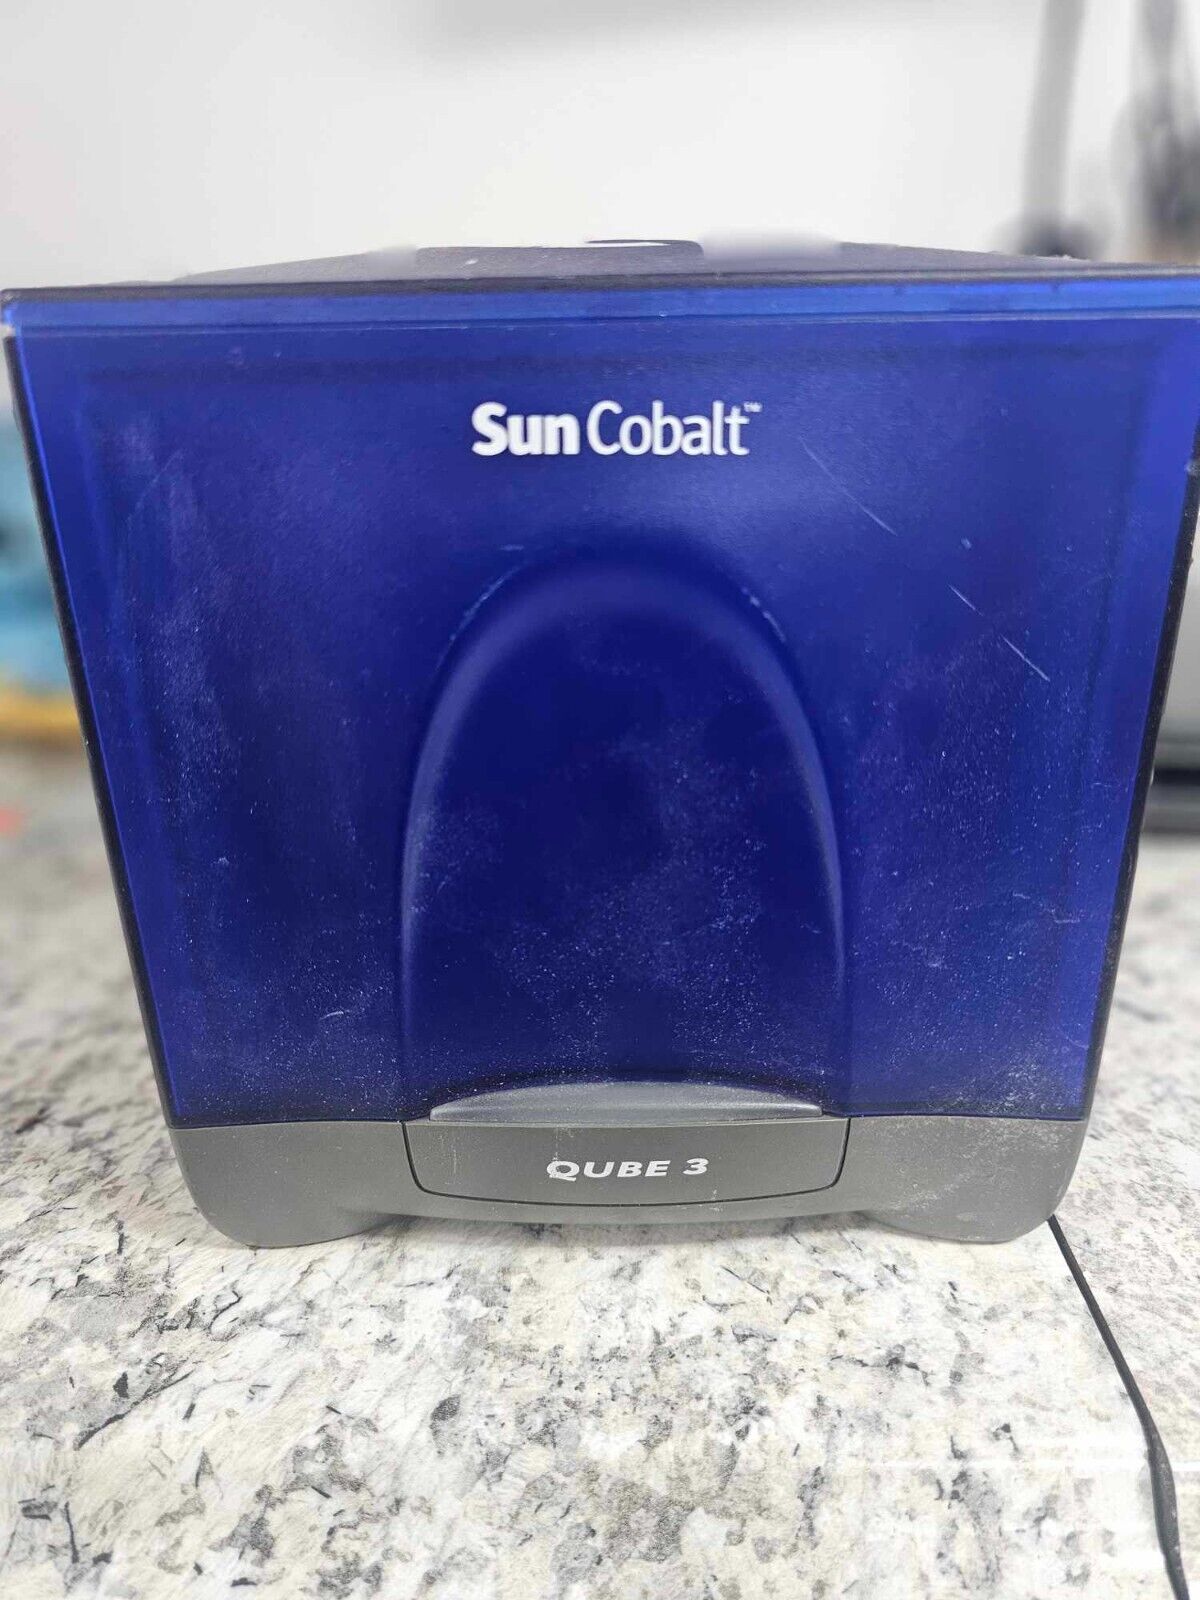 Sun Microsystems PC - Cube - Cobalt Qube 3 Computer - Untested Tech Special